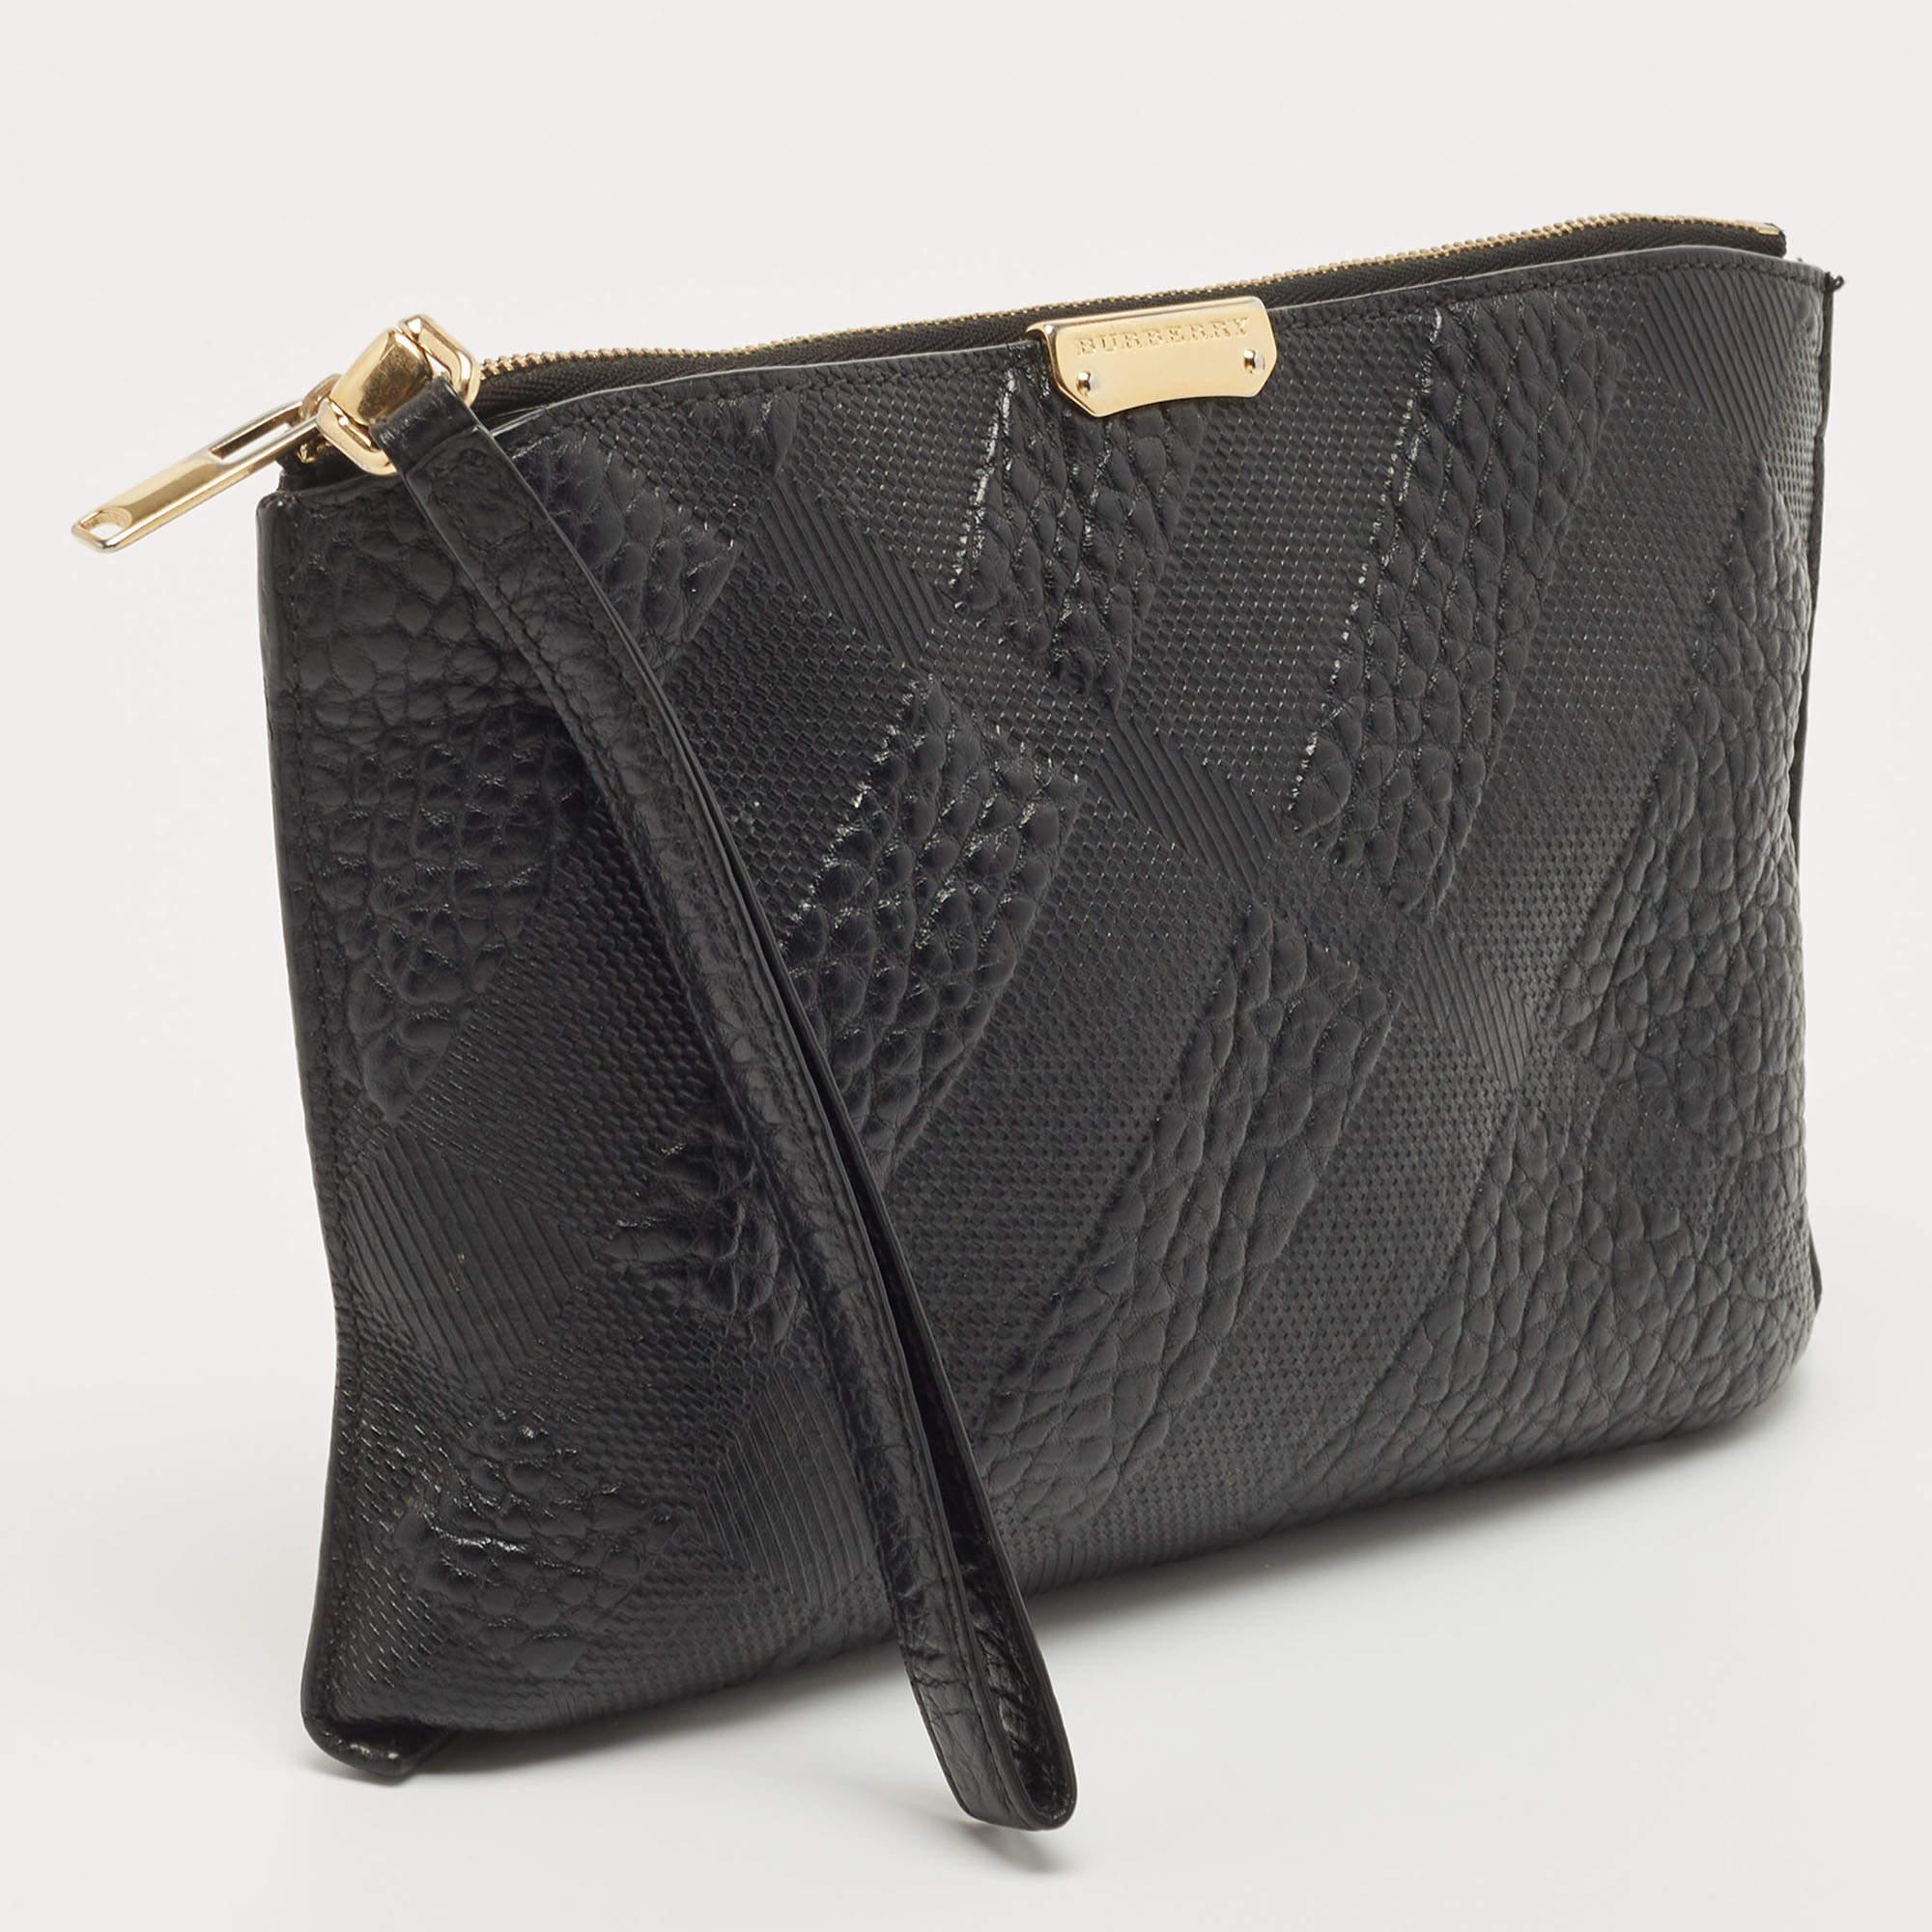 The pouch from Burberry is made from quality grained leather that features a gold-toned zip closure and minute stitch detailing. The black pouch is lined with leather & fabric and is a perfect accessory.

